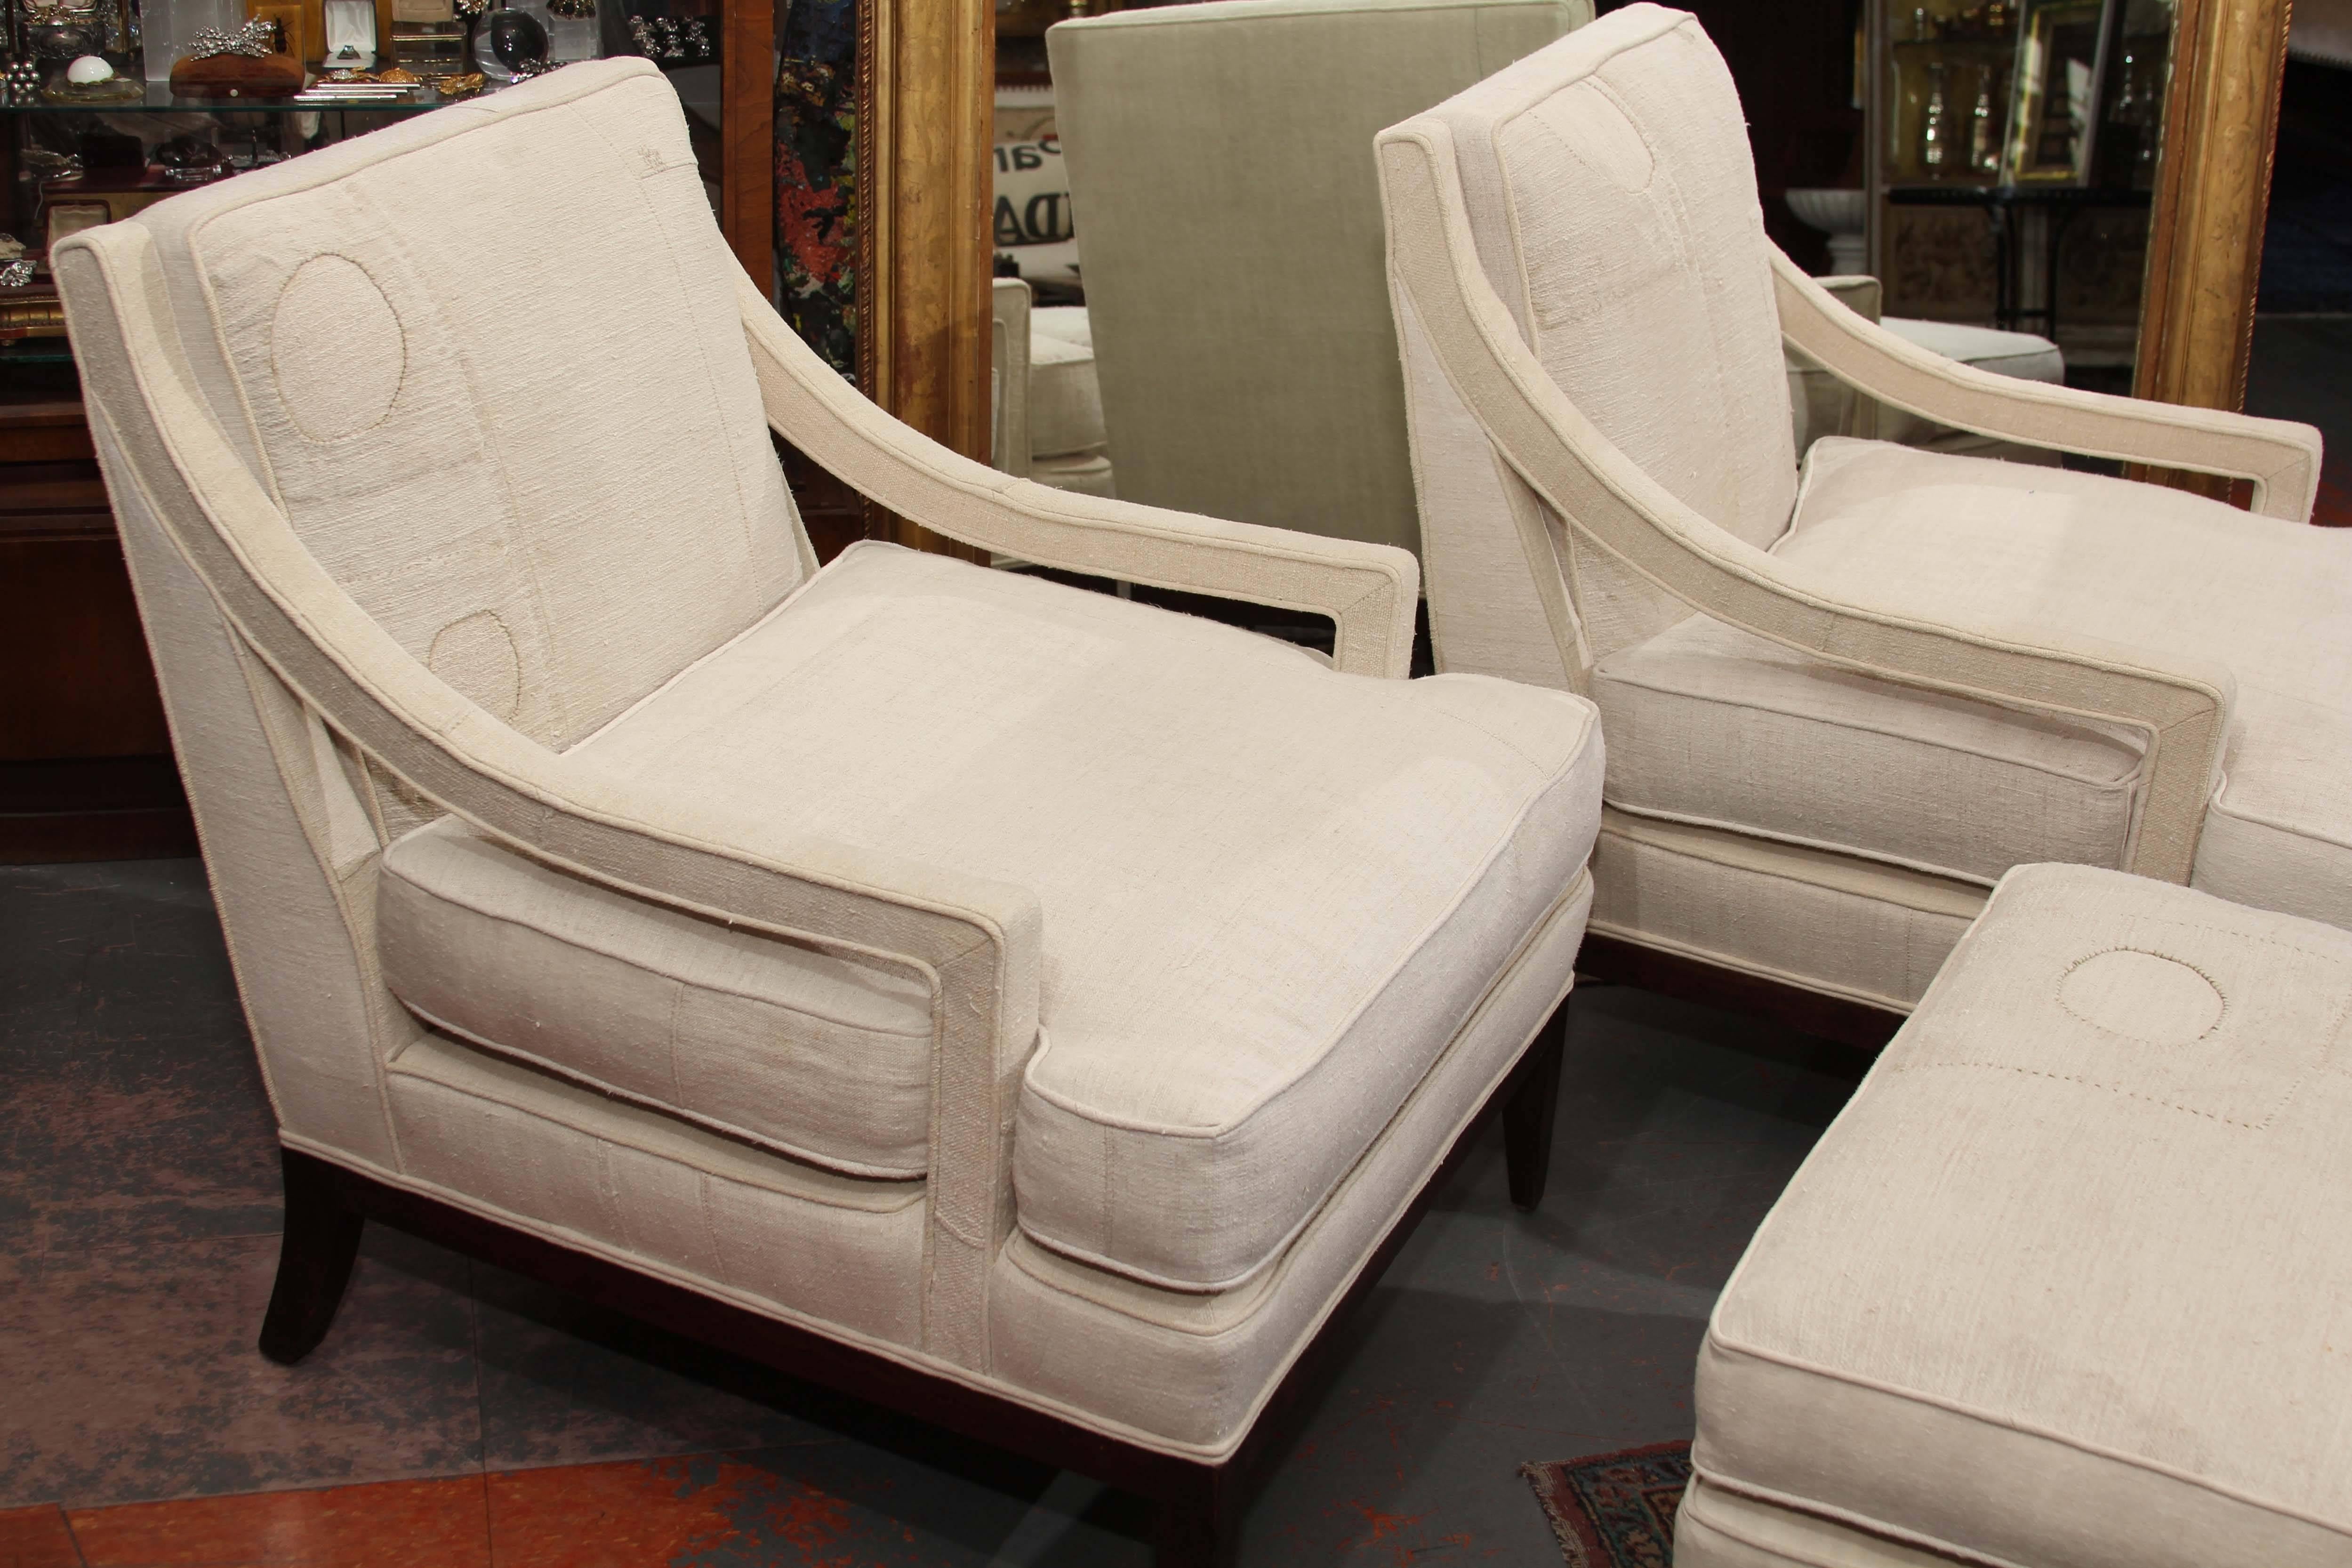 Great looking and sitting pair of Erwin-Lambeth chairs and ottomans redone in heavy antique French homespun with original patches included in the upholstery.
Reversible cushions, very handsome chairs.